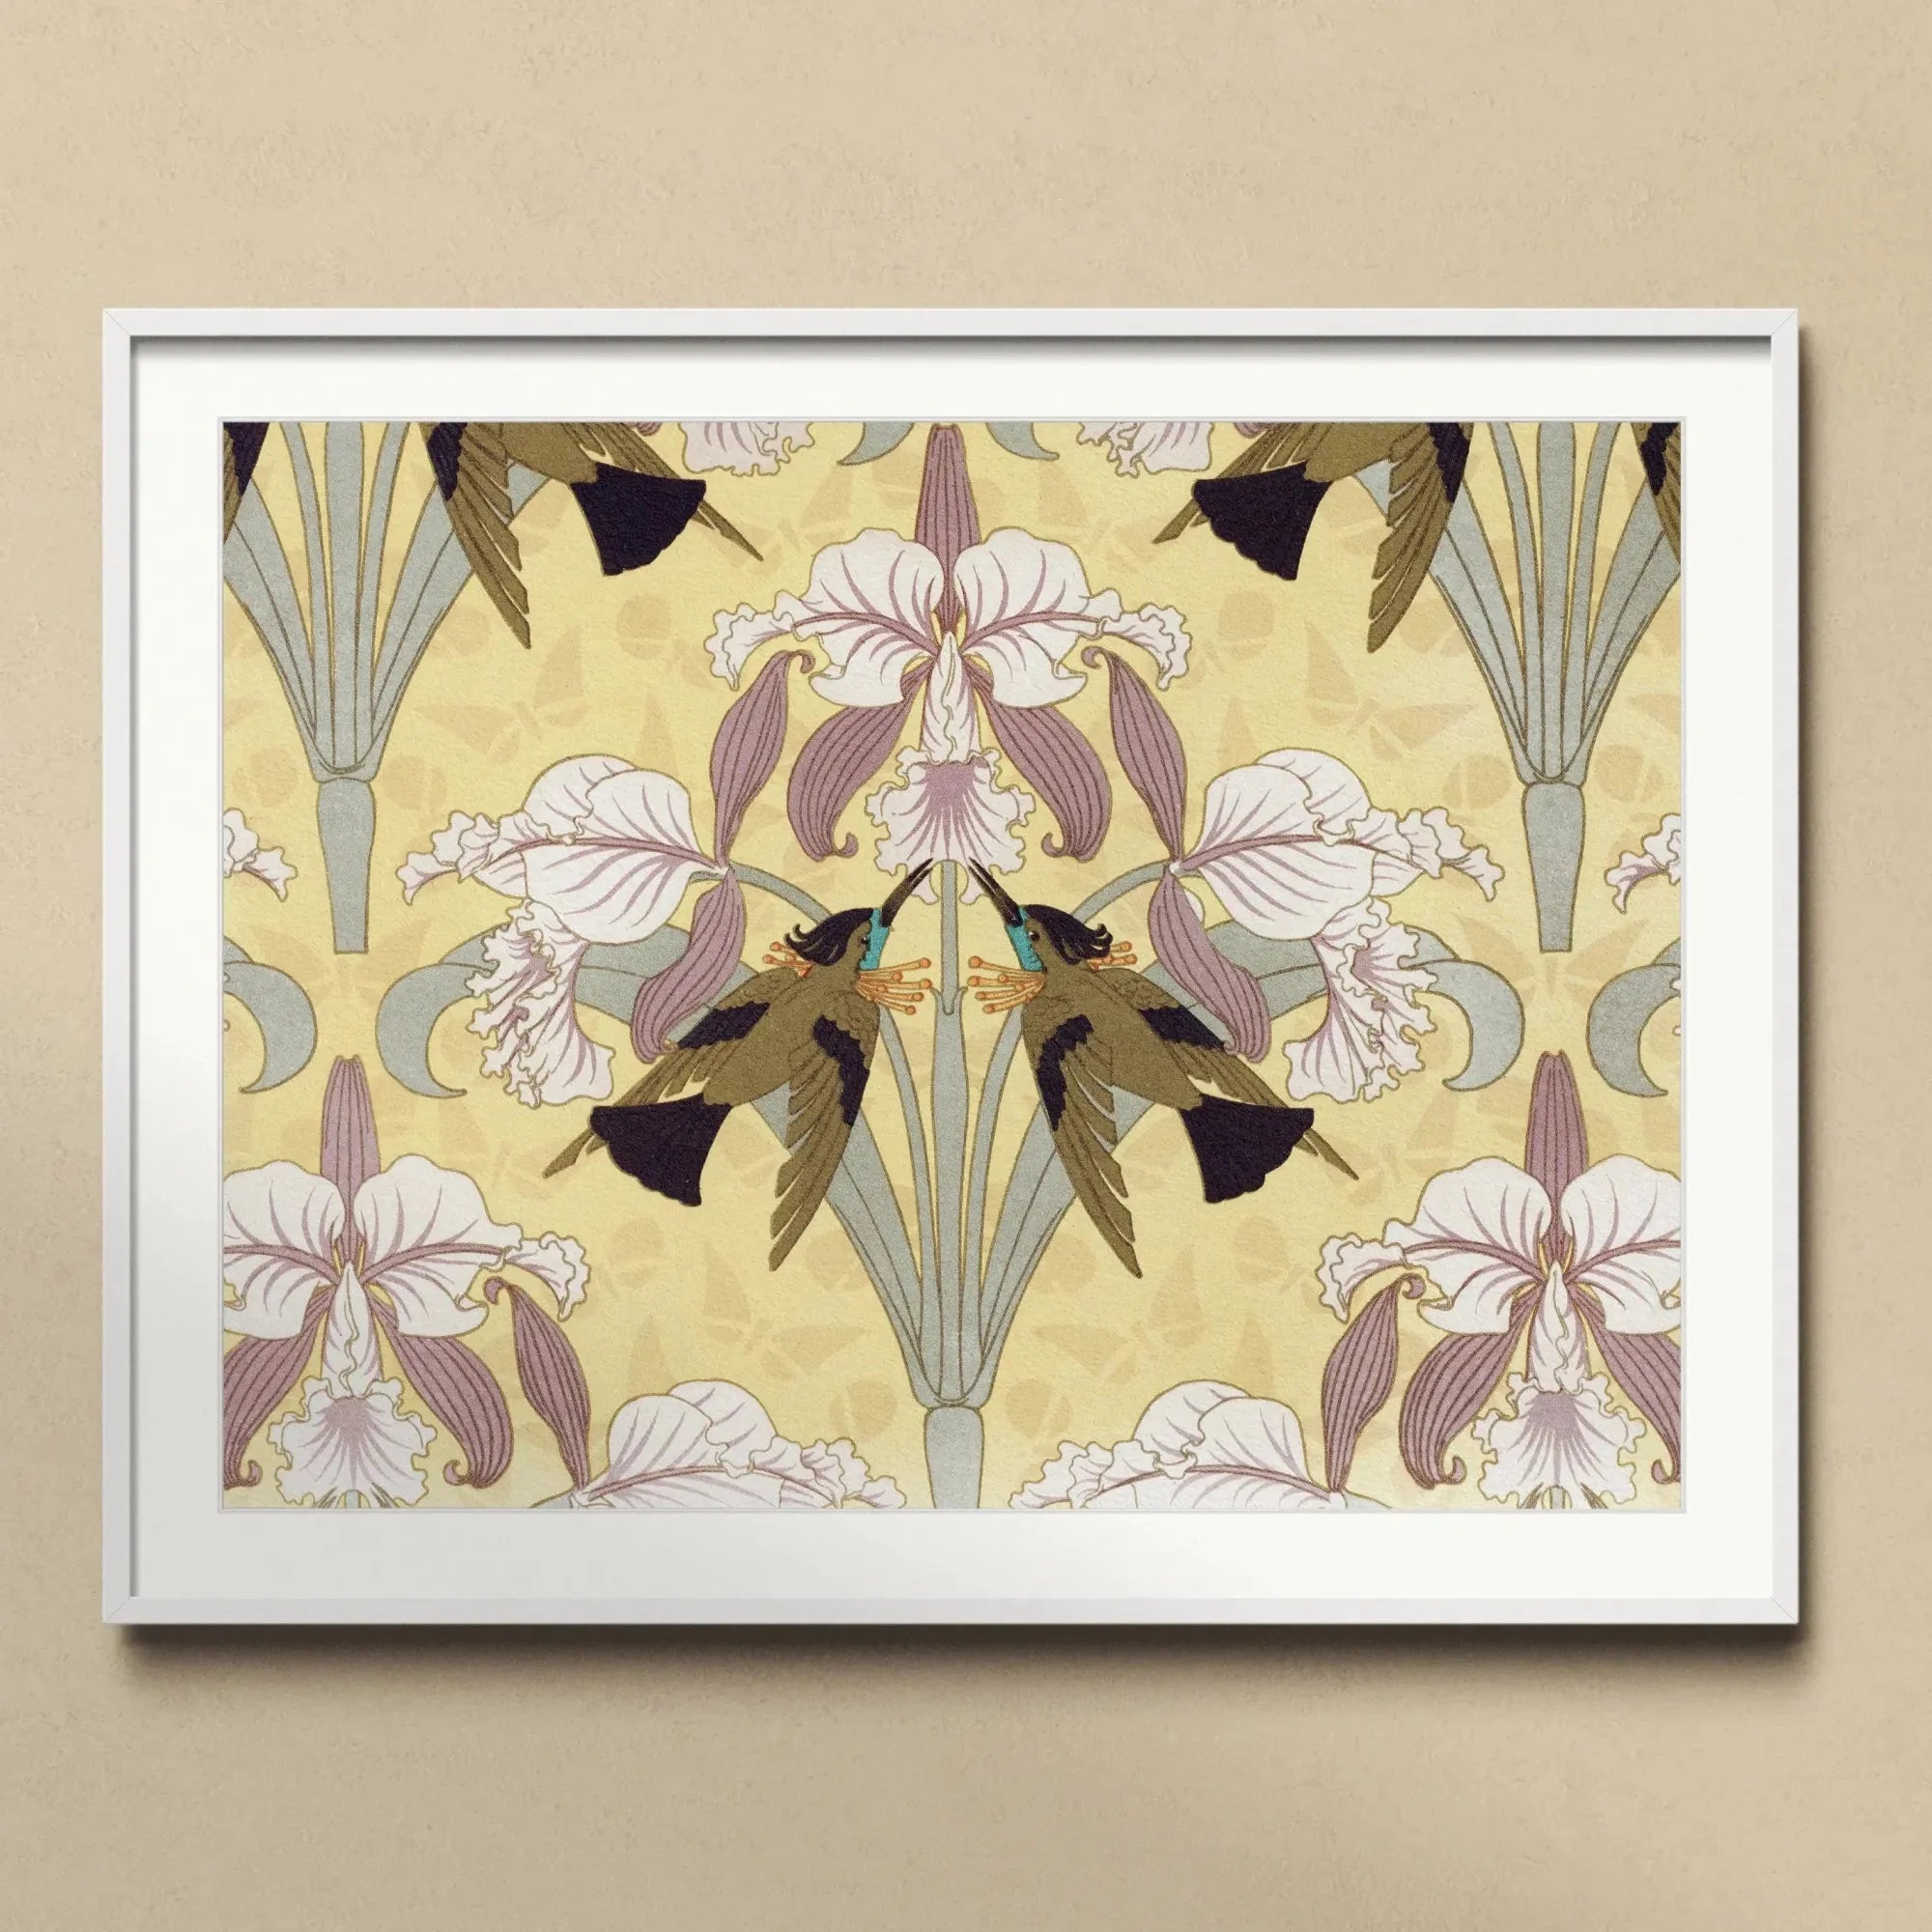 Oiseaux - mouches Et Orchidées By Maurice Pillard Verneuil Framed & Mounted Print - Posters Prints & Visual Artwork